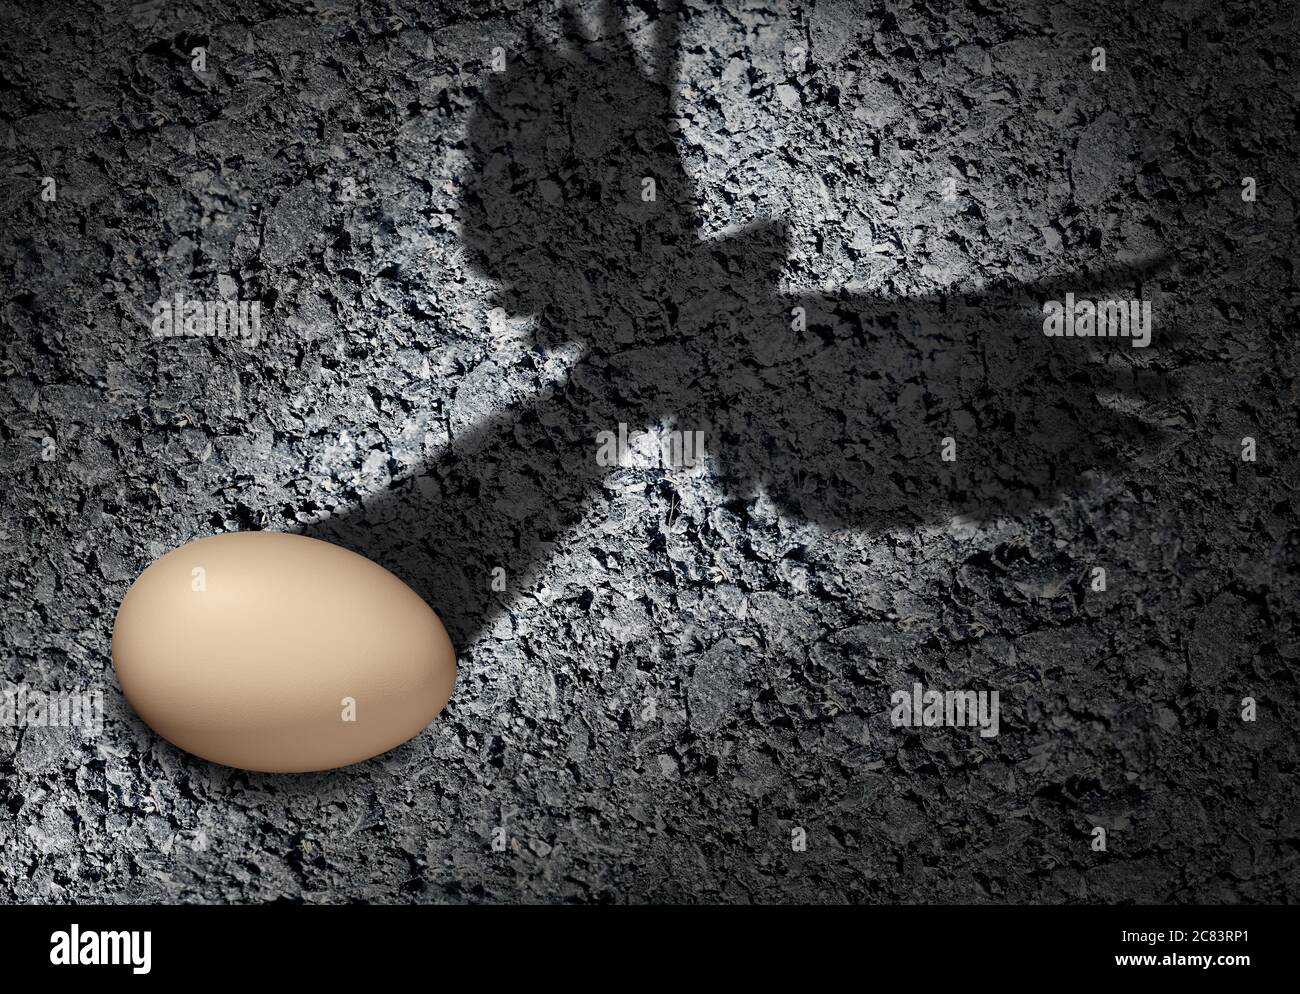 Freedom and aspiration concept or ambition idea as an egg casting a shadow of a bird as an achievement and hope for future success symbol. Stock Photo